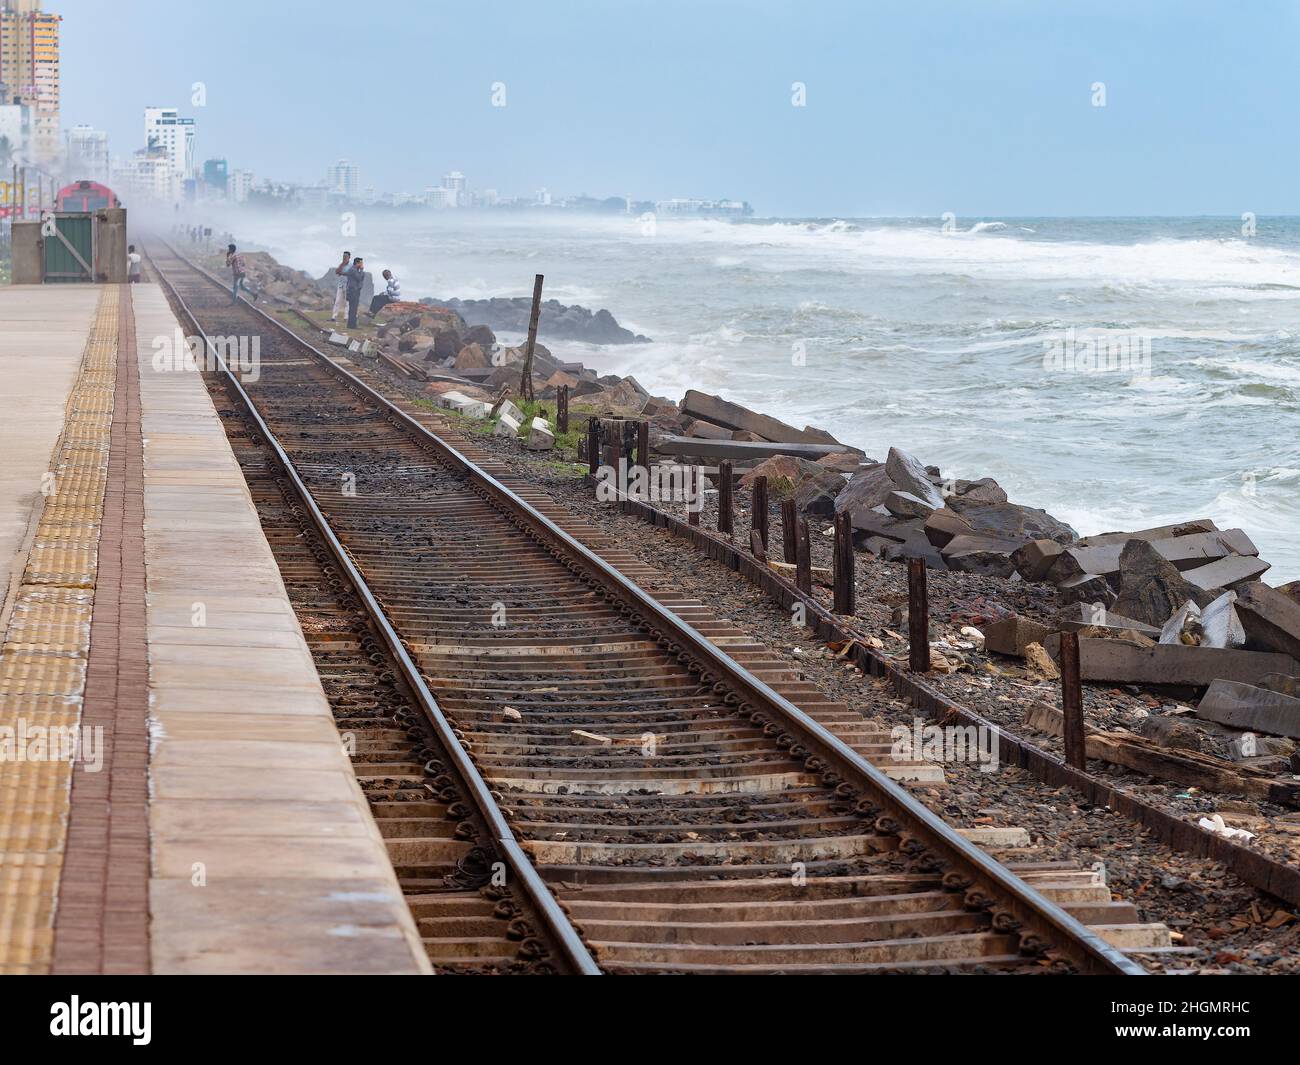 Platform and the sea at Kollupitiya Railway Station in Colombo, Sri Lanka. The station is one of the busiest railway stations on the Coastal railway l Stock Photo